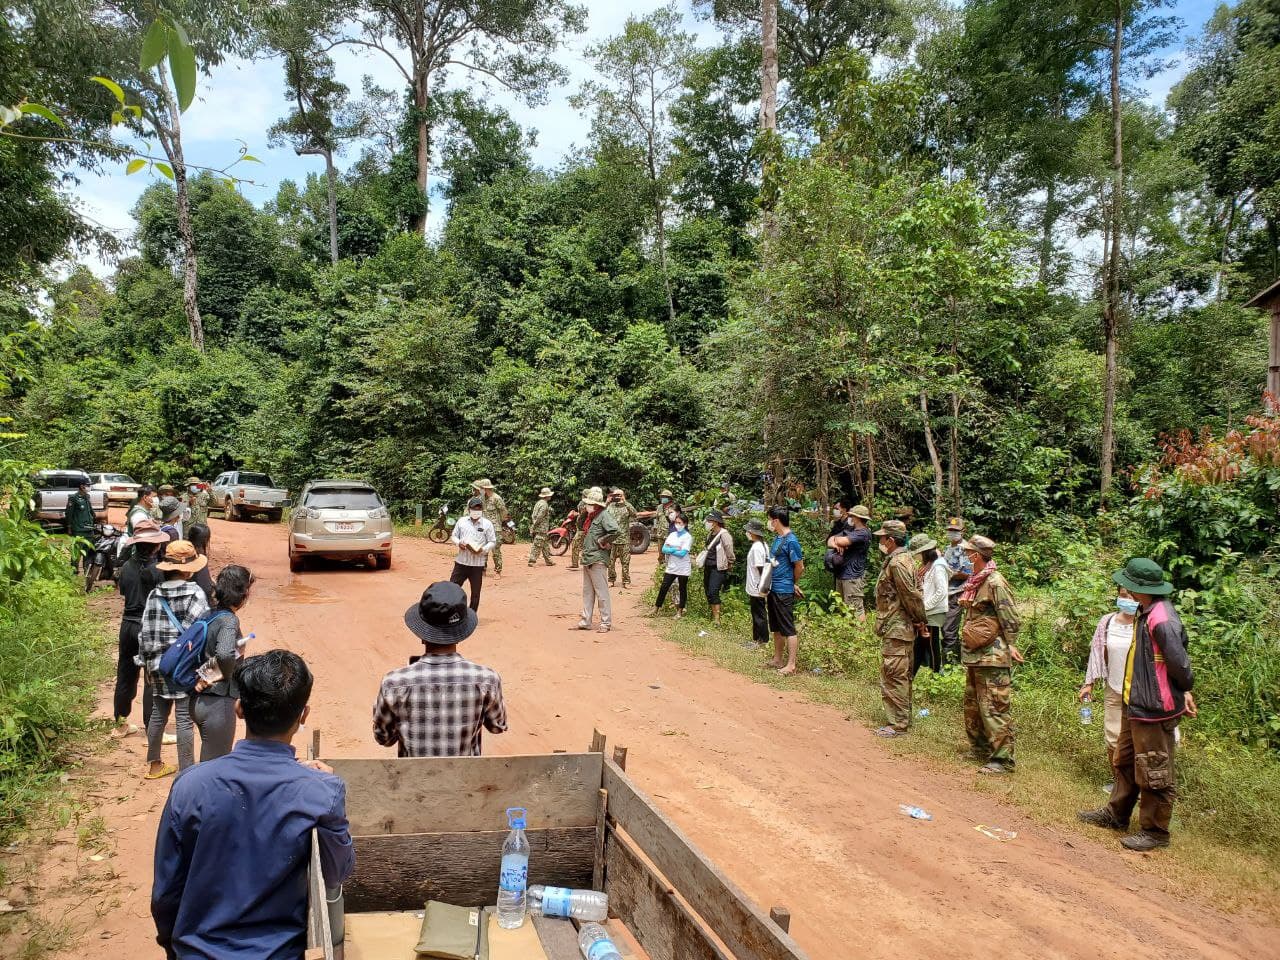 Authorities in Kampong Thom province’s Sandan district stop a youth group from visiting the O’Kbal Daun Krey community forest. Photo taken on September 25, 2021. Cheat Chan Rainsy